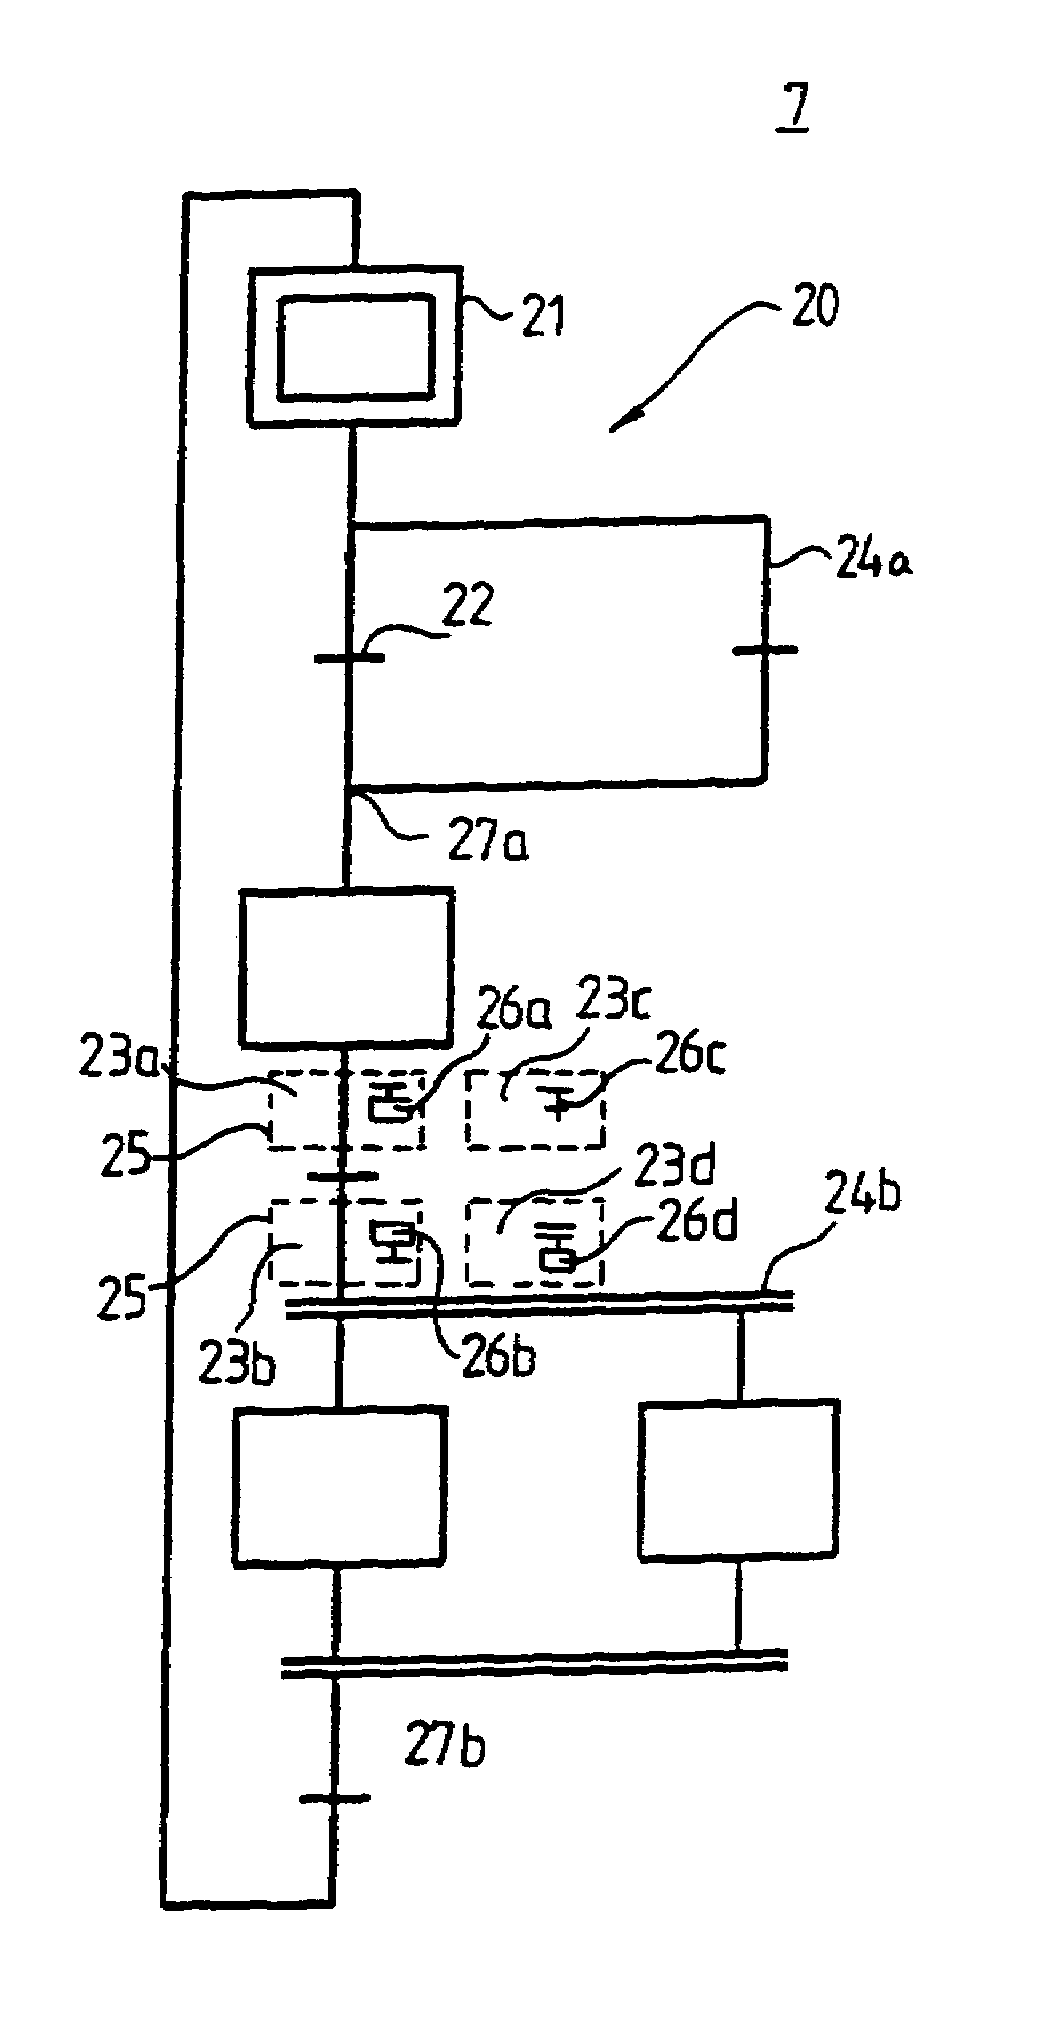 Method for inserting objects into a working area in a computer application